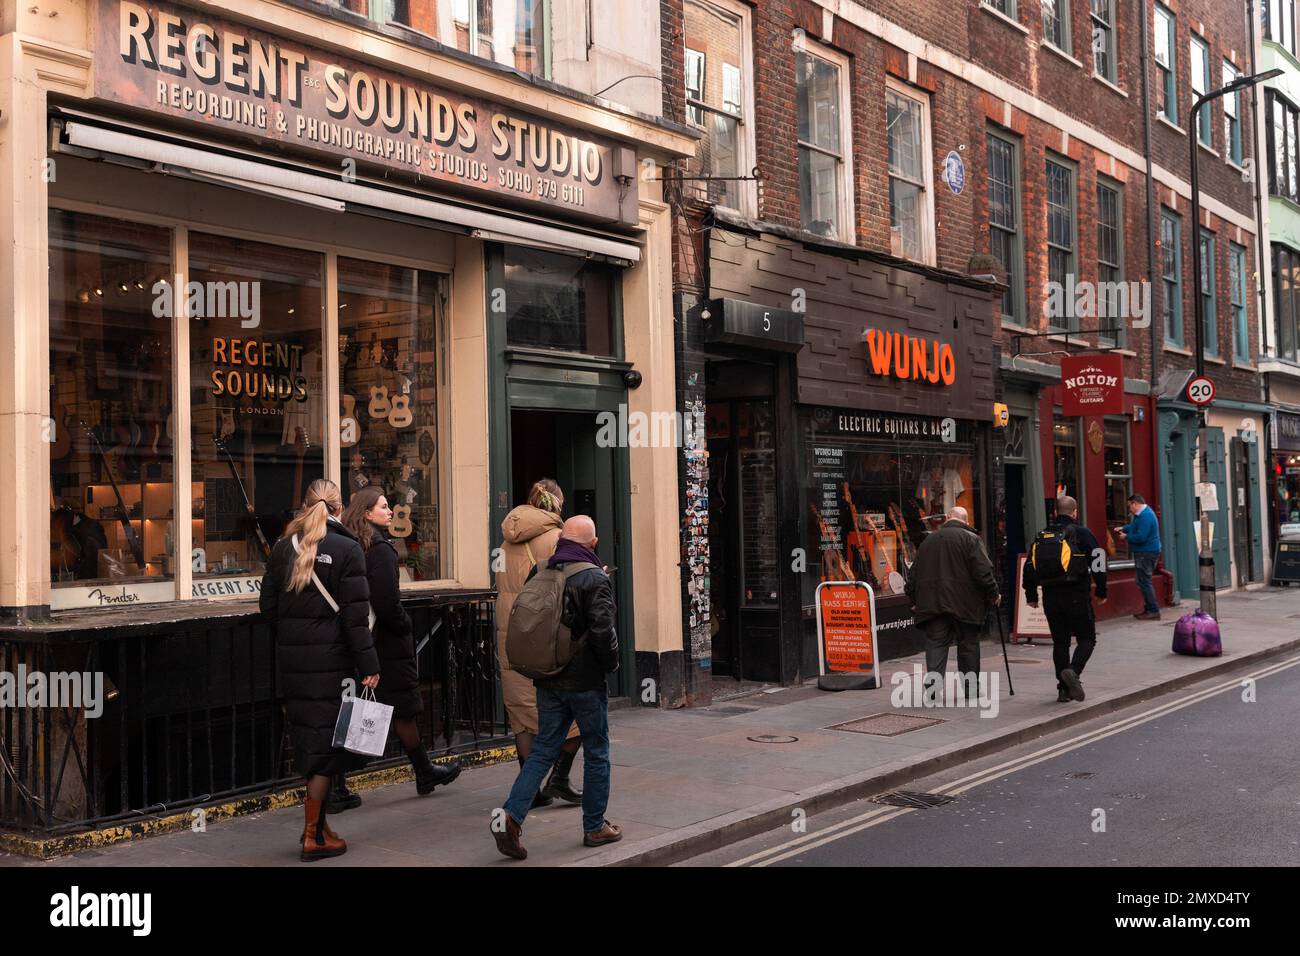 London, UK. 30th January, 2023. Members of the public pass Regent Sounds Studio in Denmark Street. The studio, which is now a guitar shop, operated between 1951 and the early 1980s, playing host to The Rolling Stones, The Jimi Hendrix Experience, The Kinks, The Who, Black Sabbath, The Bee Gees, Tom Jones and The Yardbirds among others. Denmark Street is currently experiencing considerable redevelopment as a result of Crossrail. Credit: Mark Kerrison/Alamy Live News Stock Photo